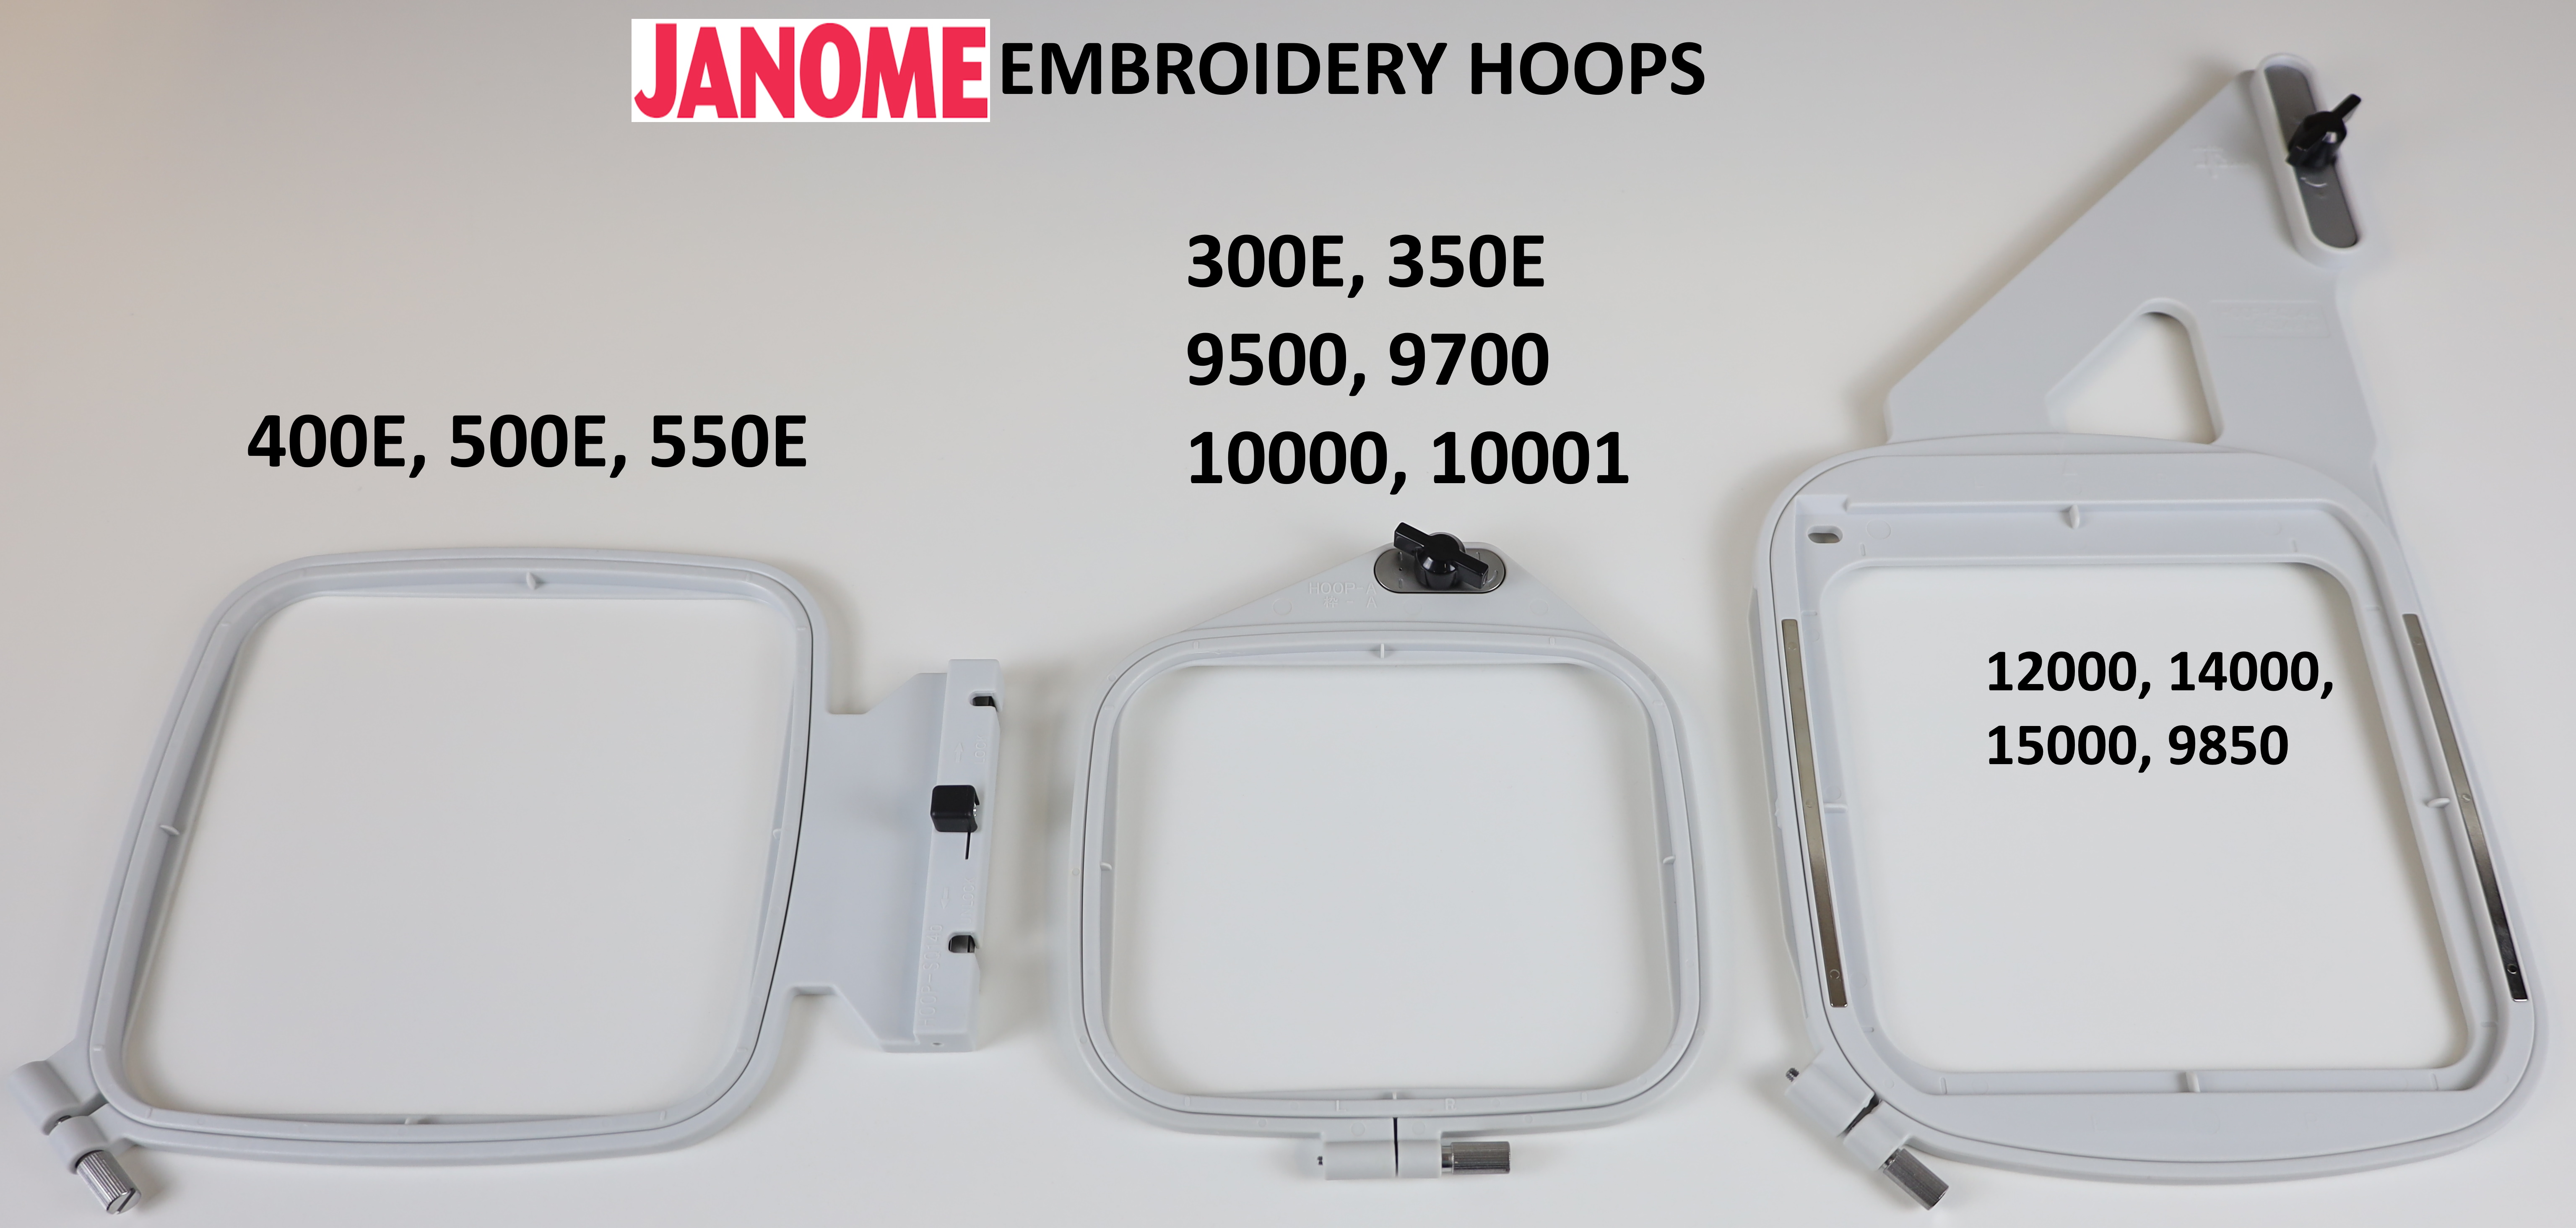 Janome Embroidery Machine Hoops